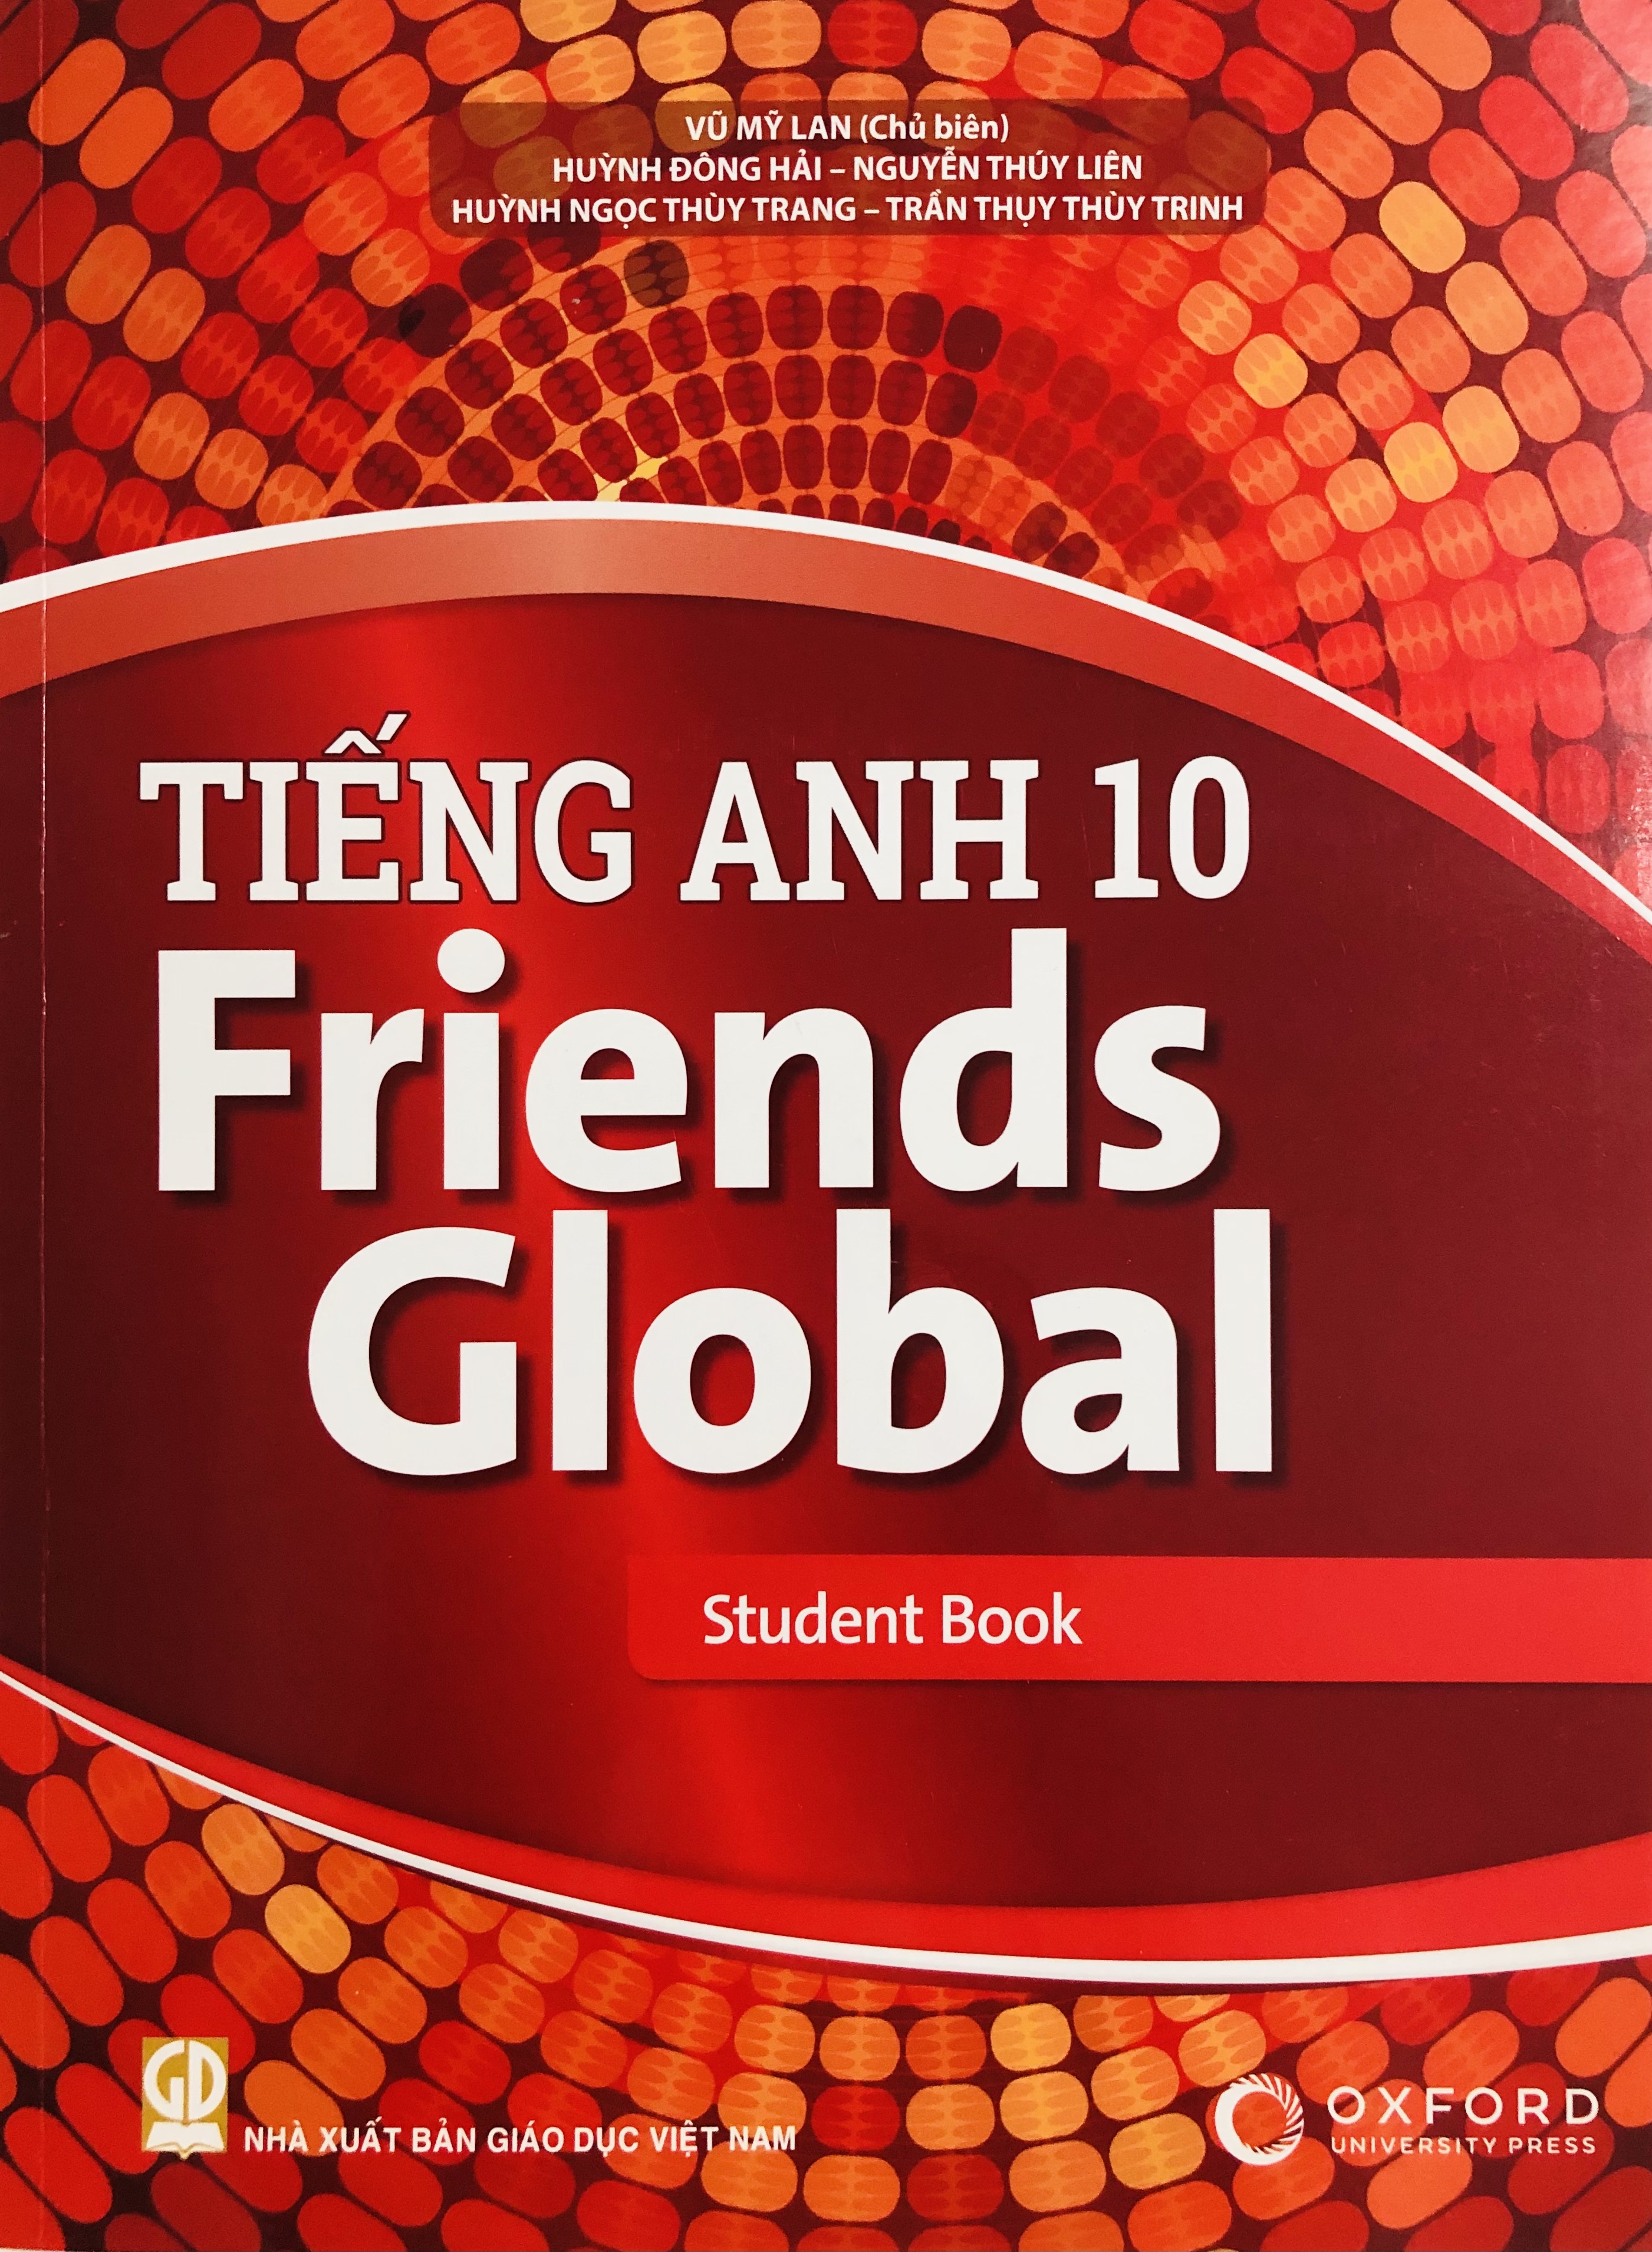 Friends Global 10 - Student Book